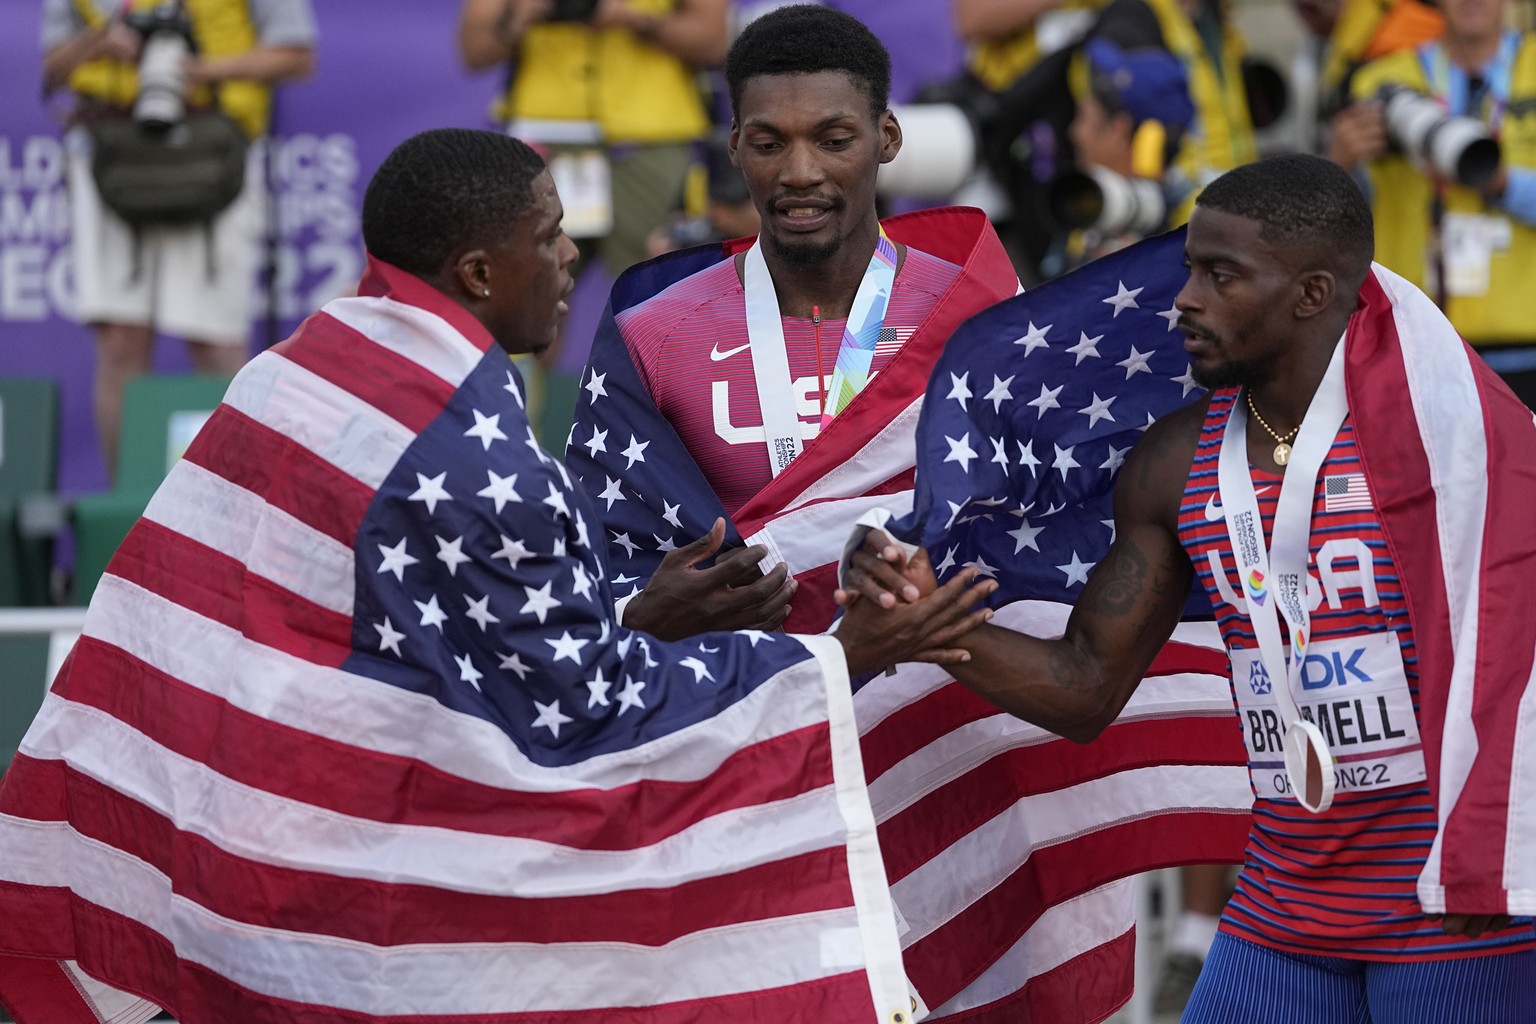 Gold medalist Fred Kerley, of the United States, center, stands with silver medalist Marvin Bracy, of the United States, right, and bronze medalist Trayvon Bromell, of the United States, speak after t ...